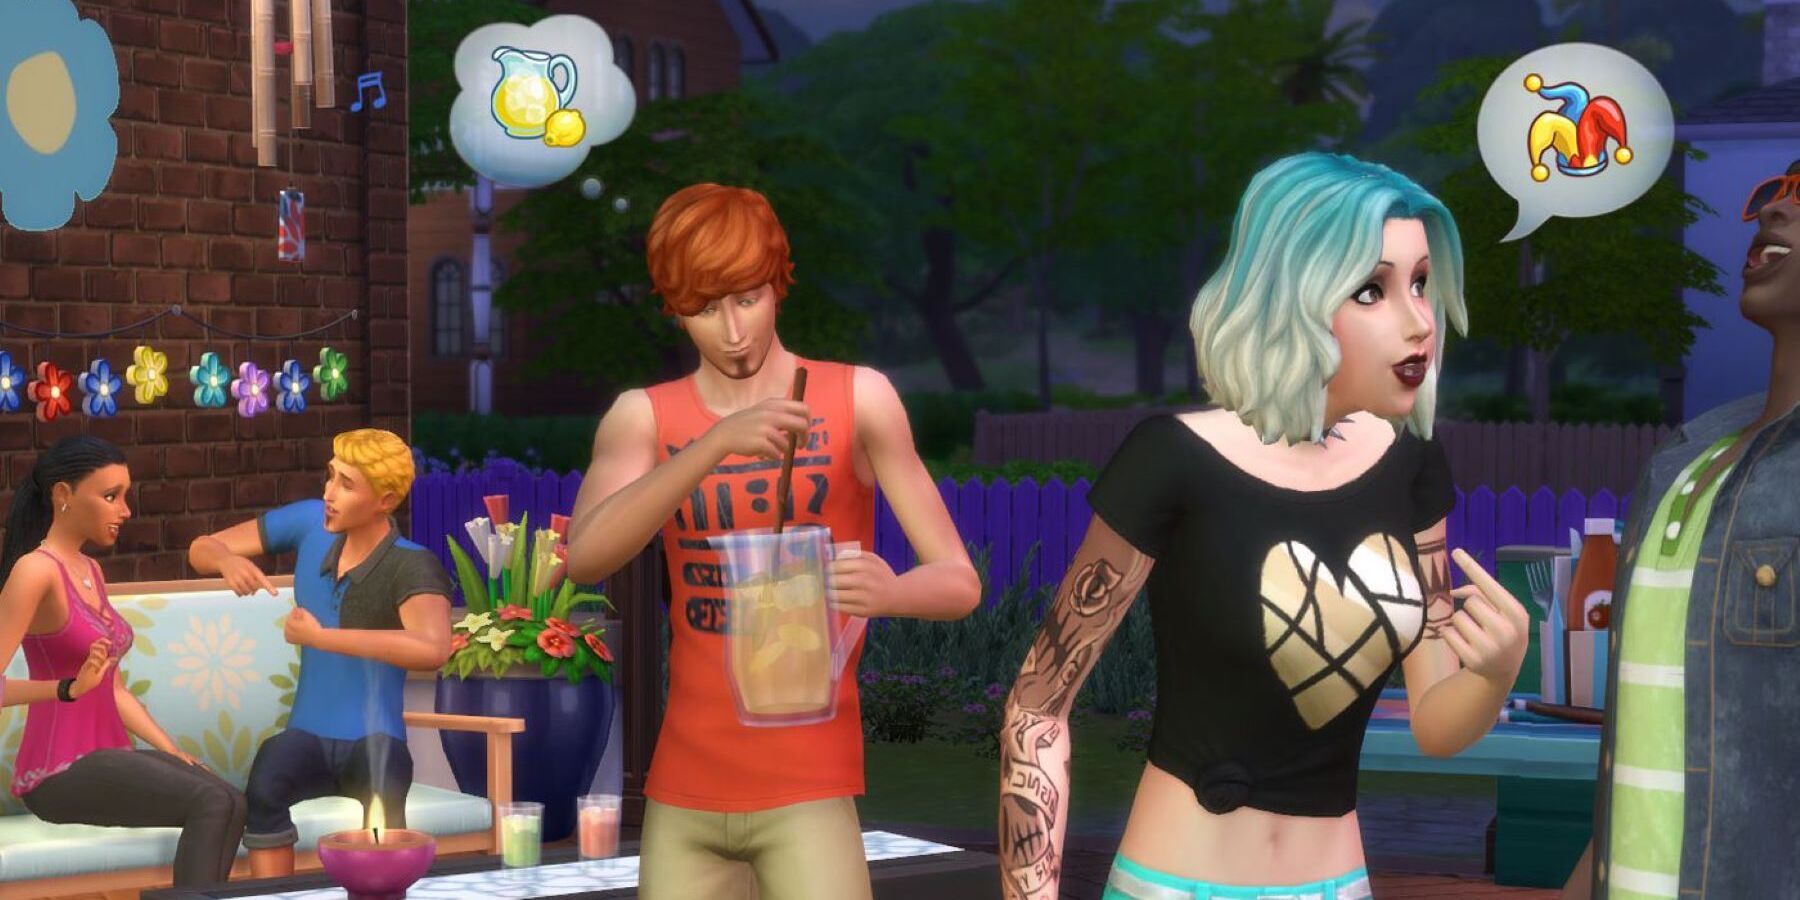 How The Sims 4 Could Prop Up The Rumored Sims Movie